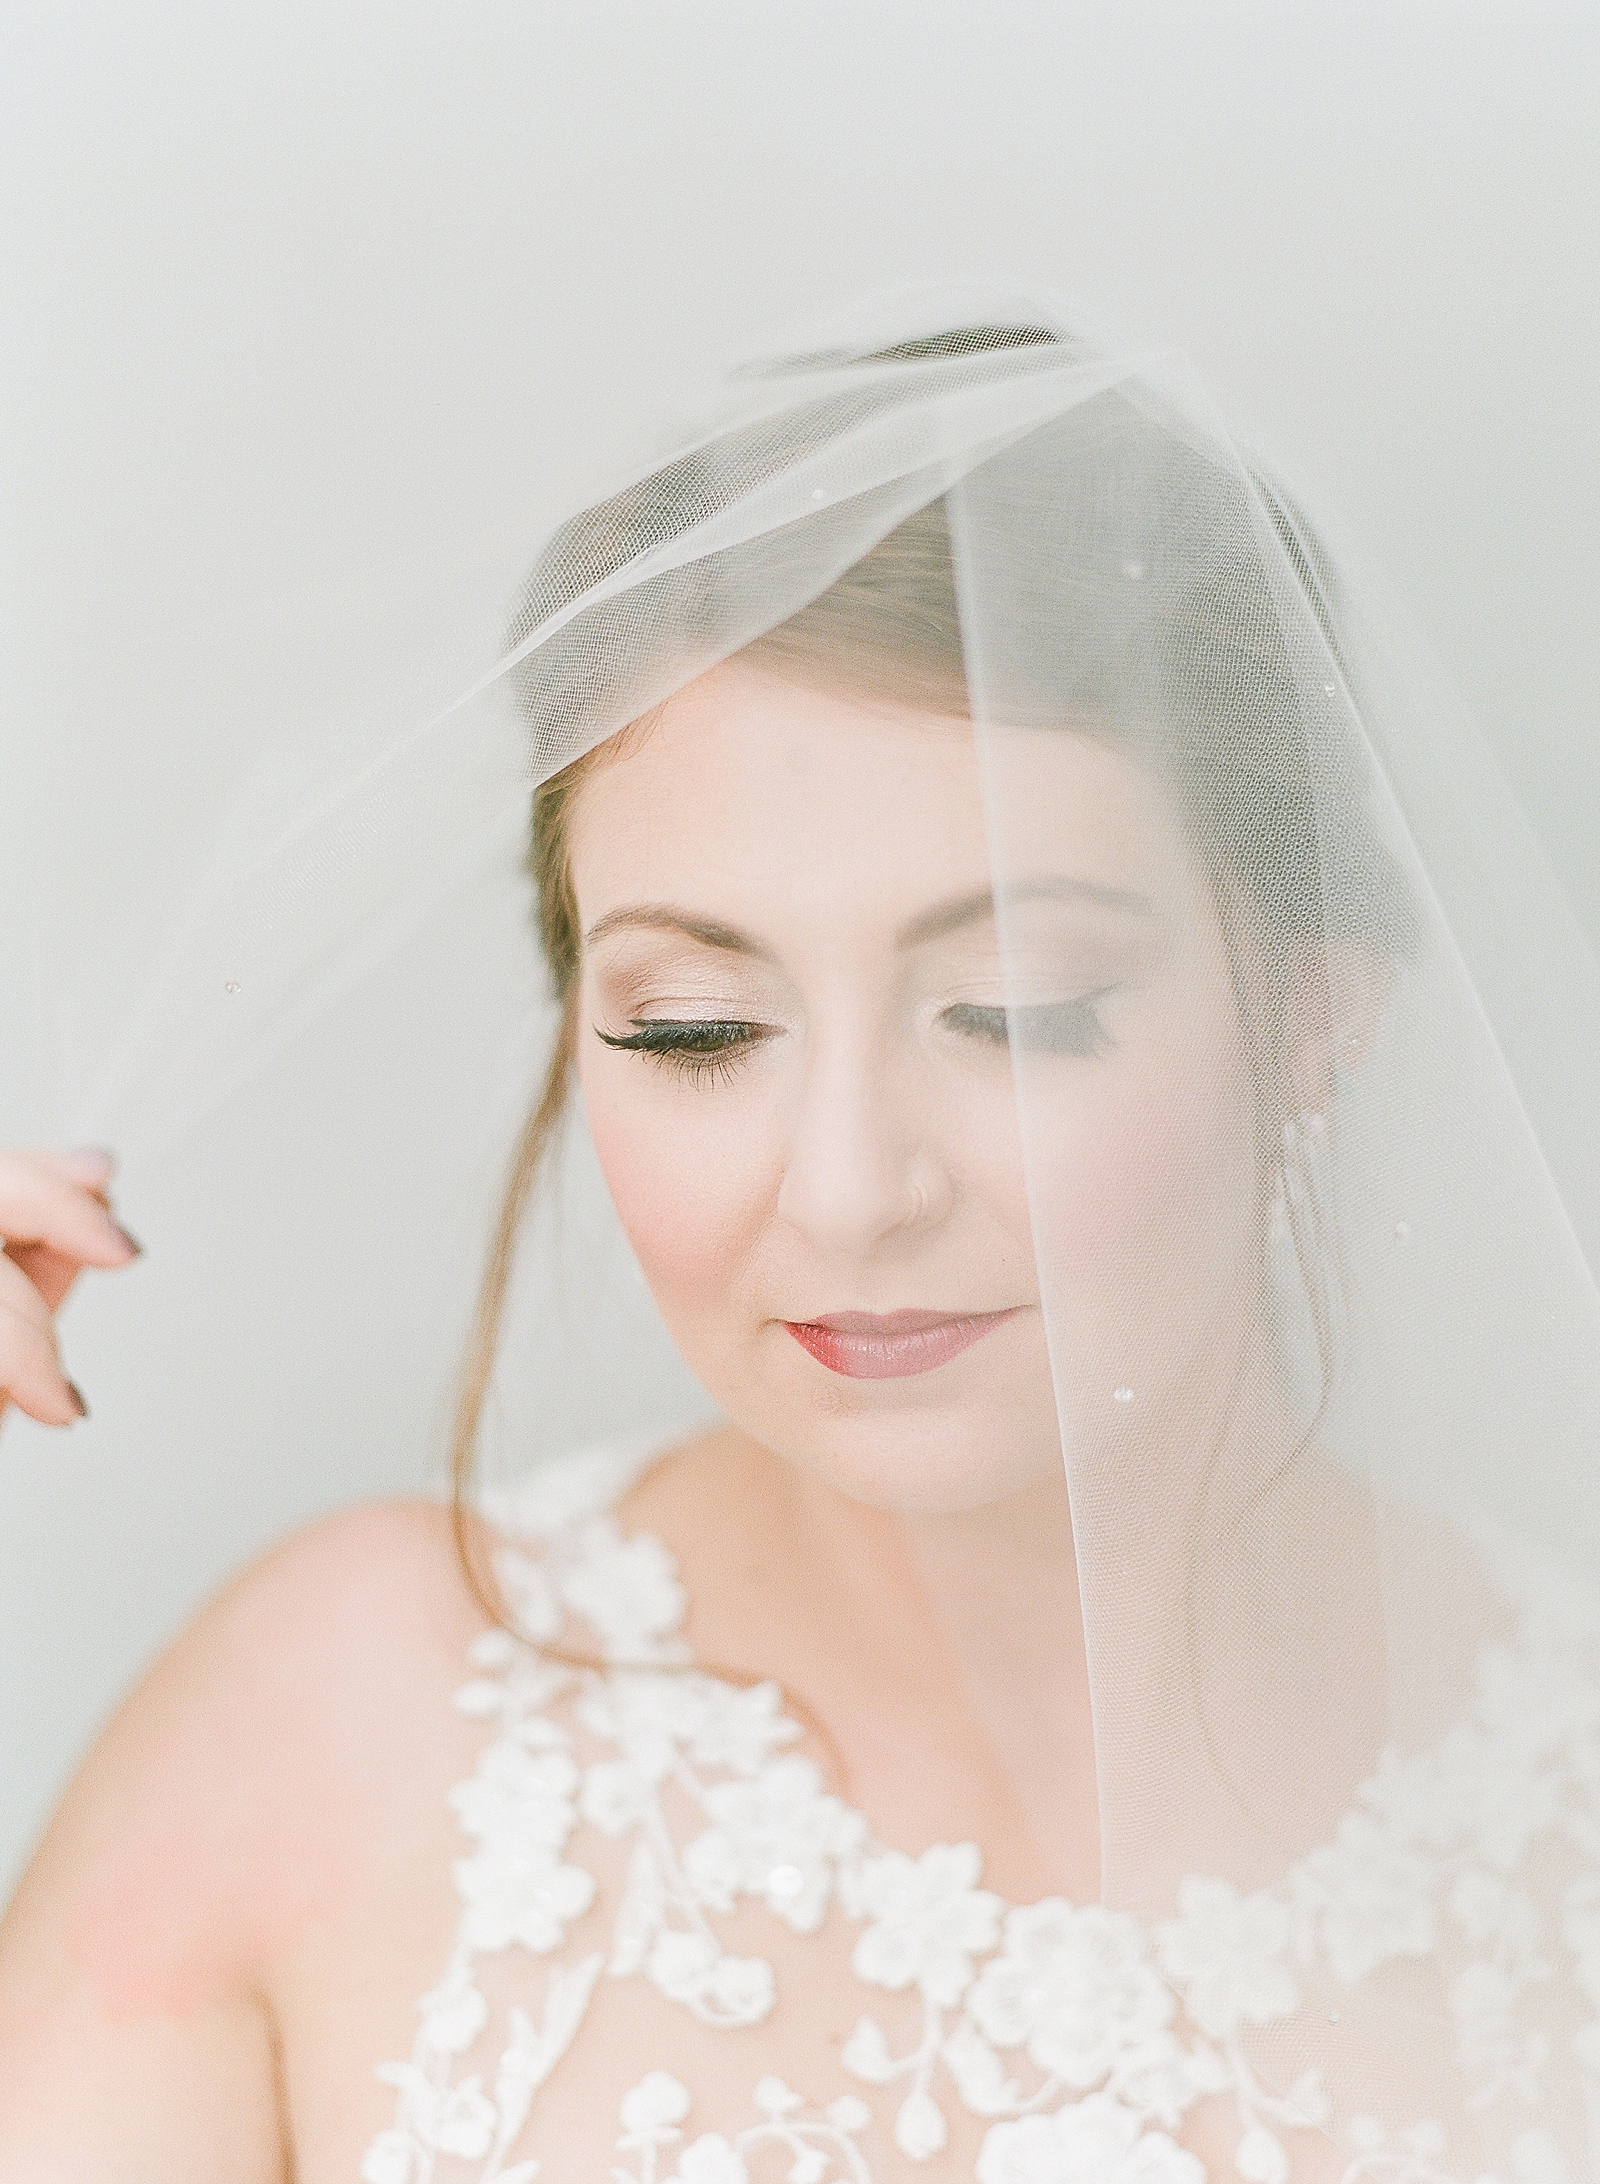 Asheville Bridal Editorial Bride Looking Down With Veil Photo